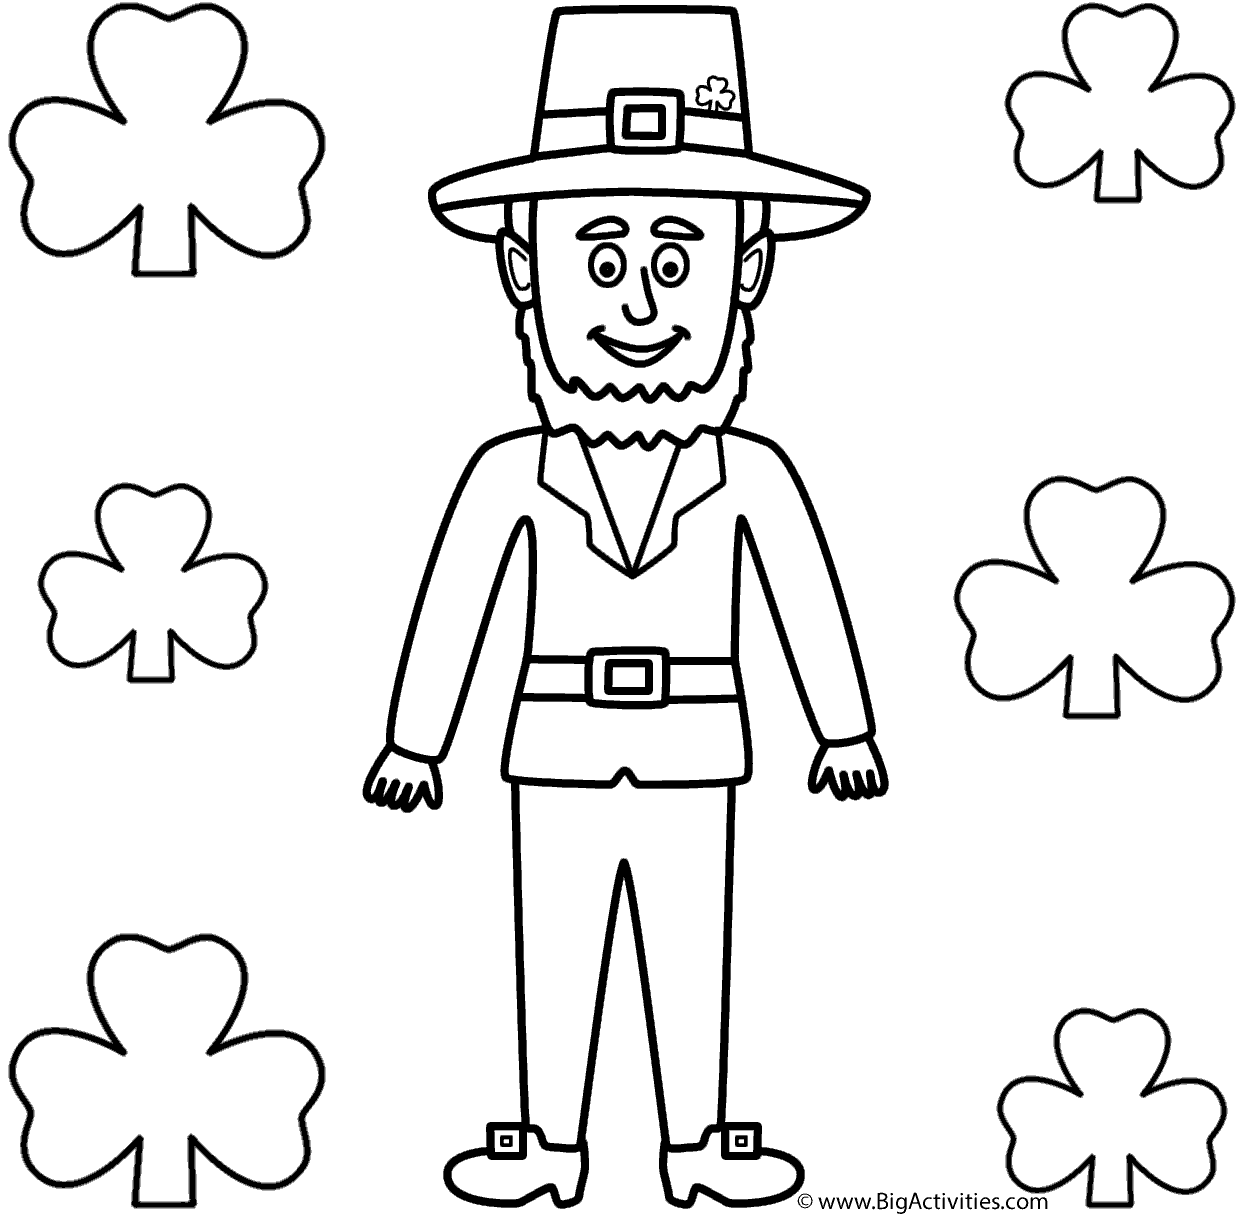 Lucky Charms Coloring Pages Sketch Coloring Page.